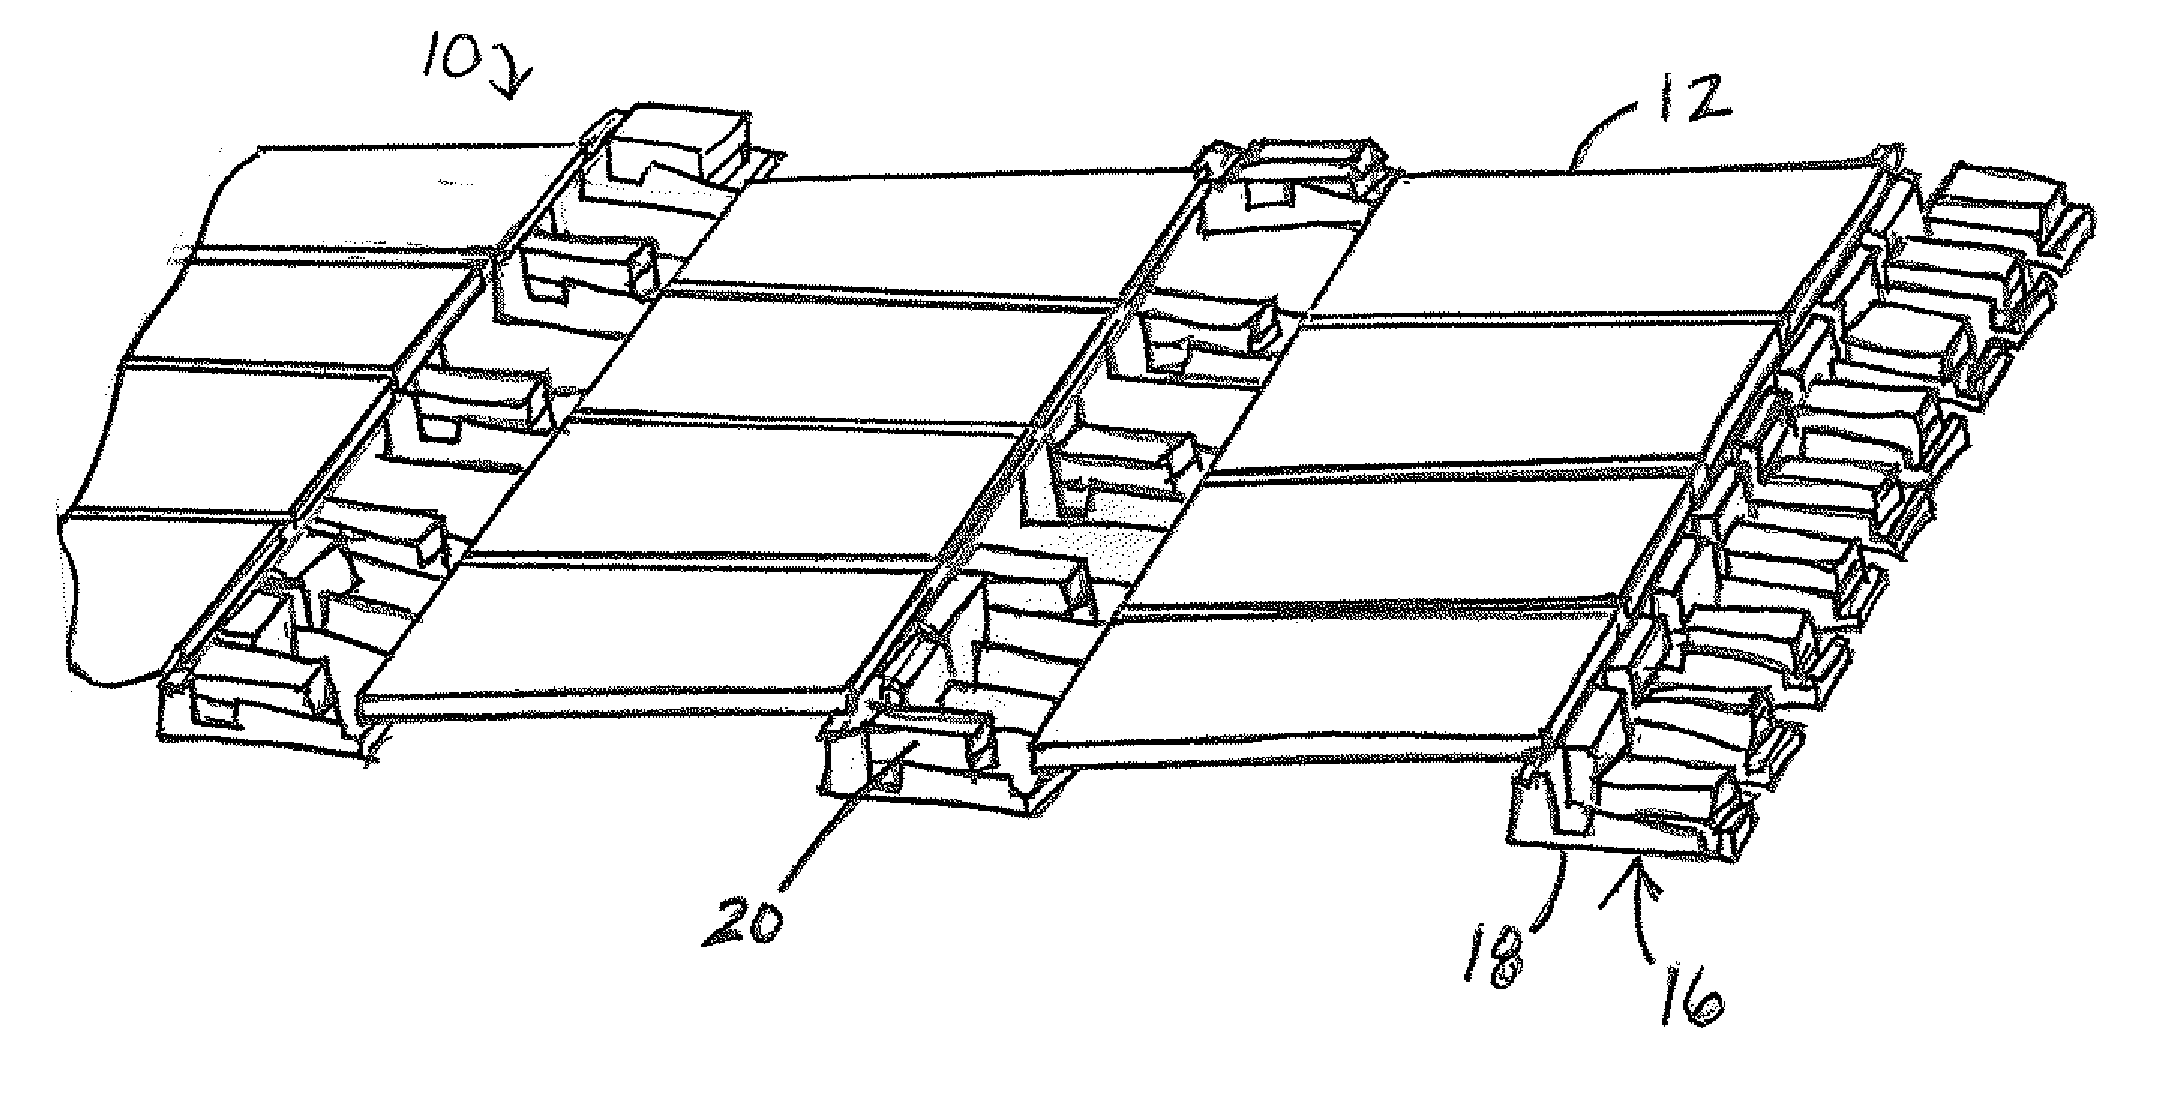 System and method for mounting photovoltaic modules